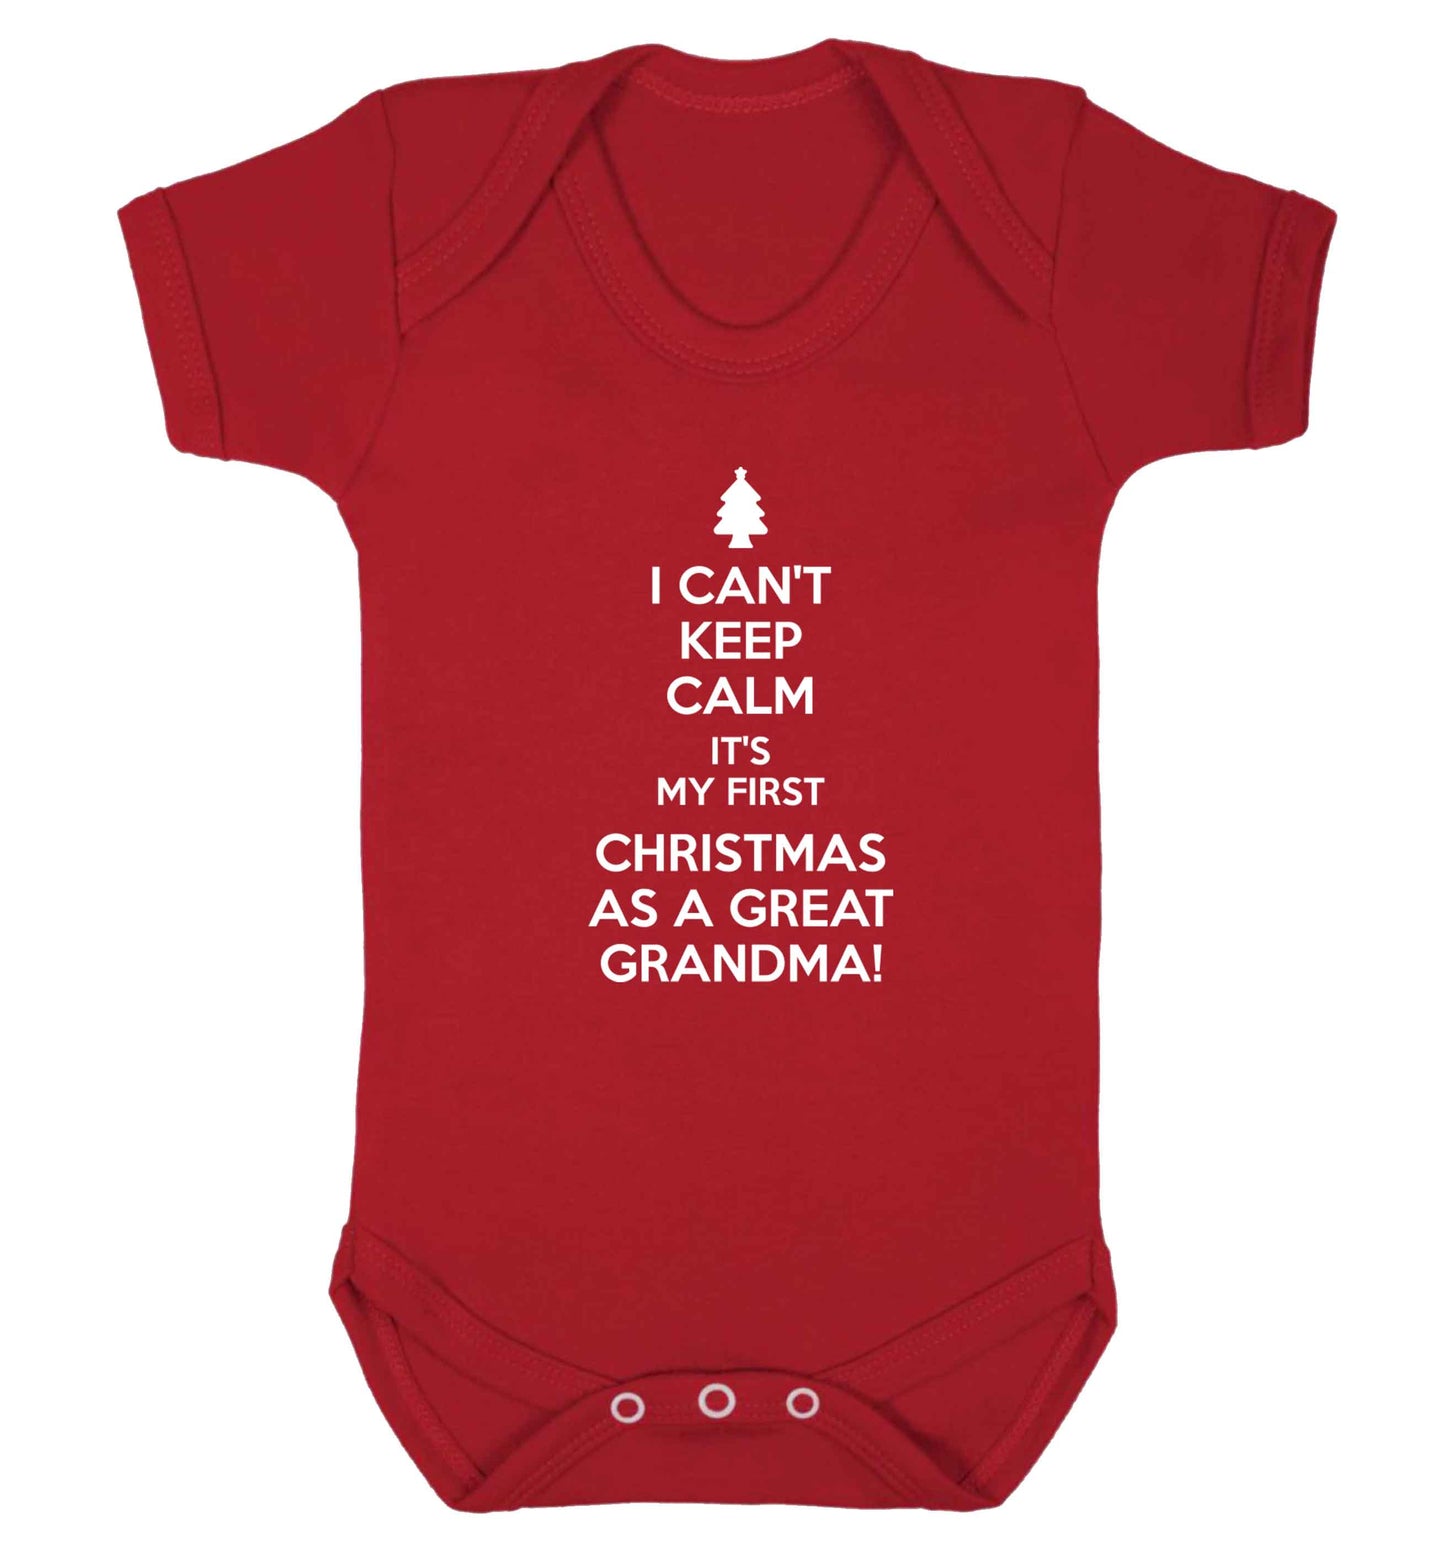 I can't keep calm it's my first Christmas as a great grandma! Baby Vest red 18-24 months